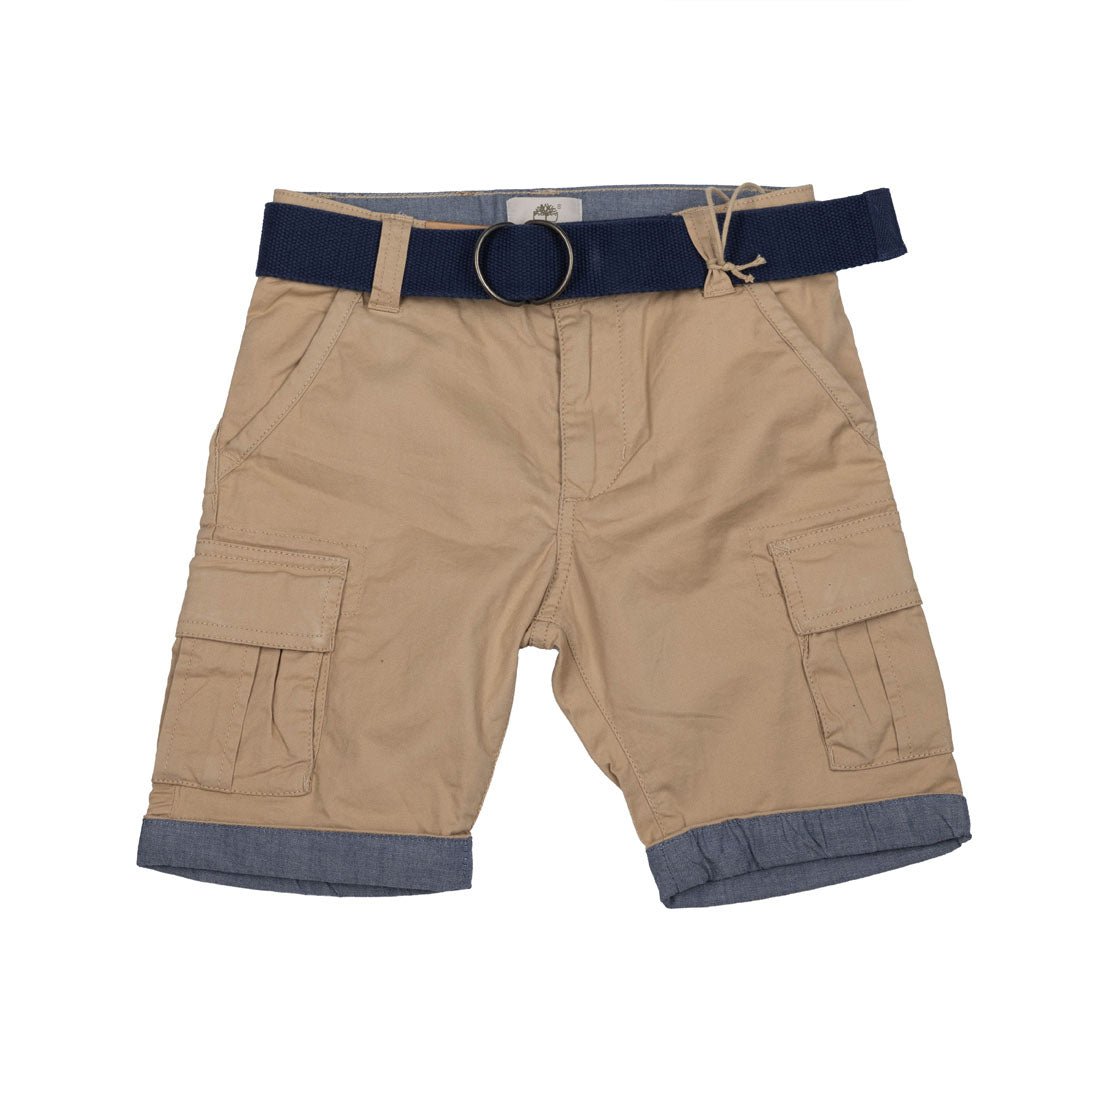 Timberland Brand New Shorts For Boys - mymadstore.com